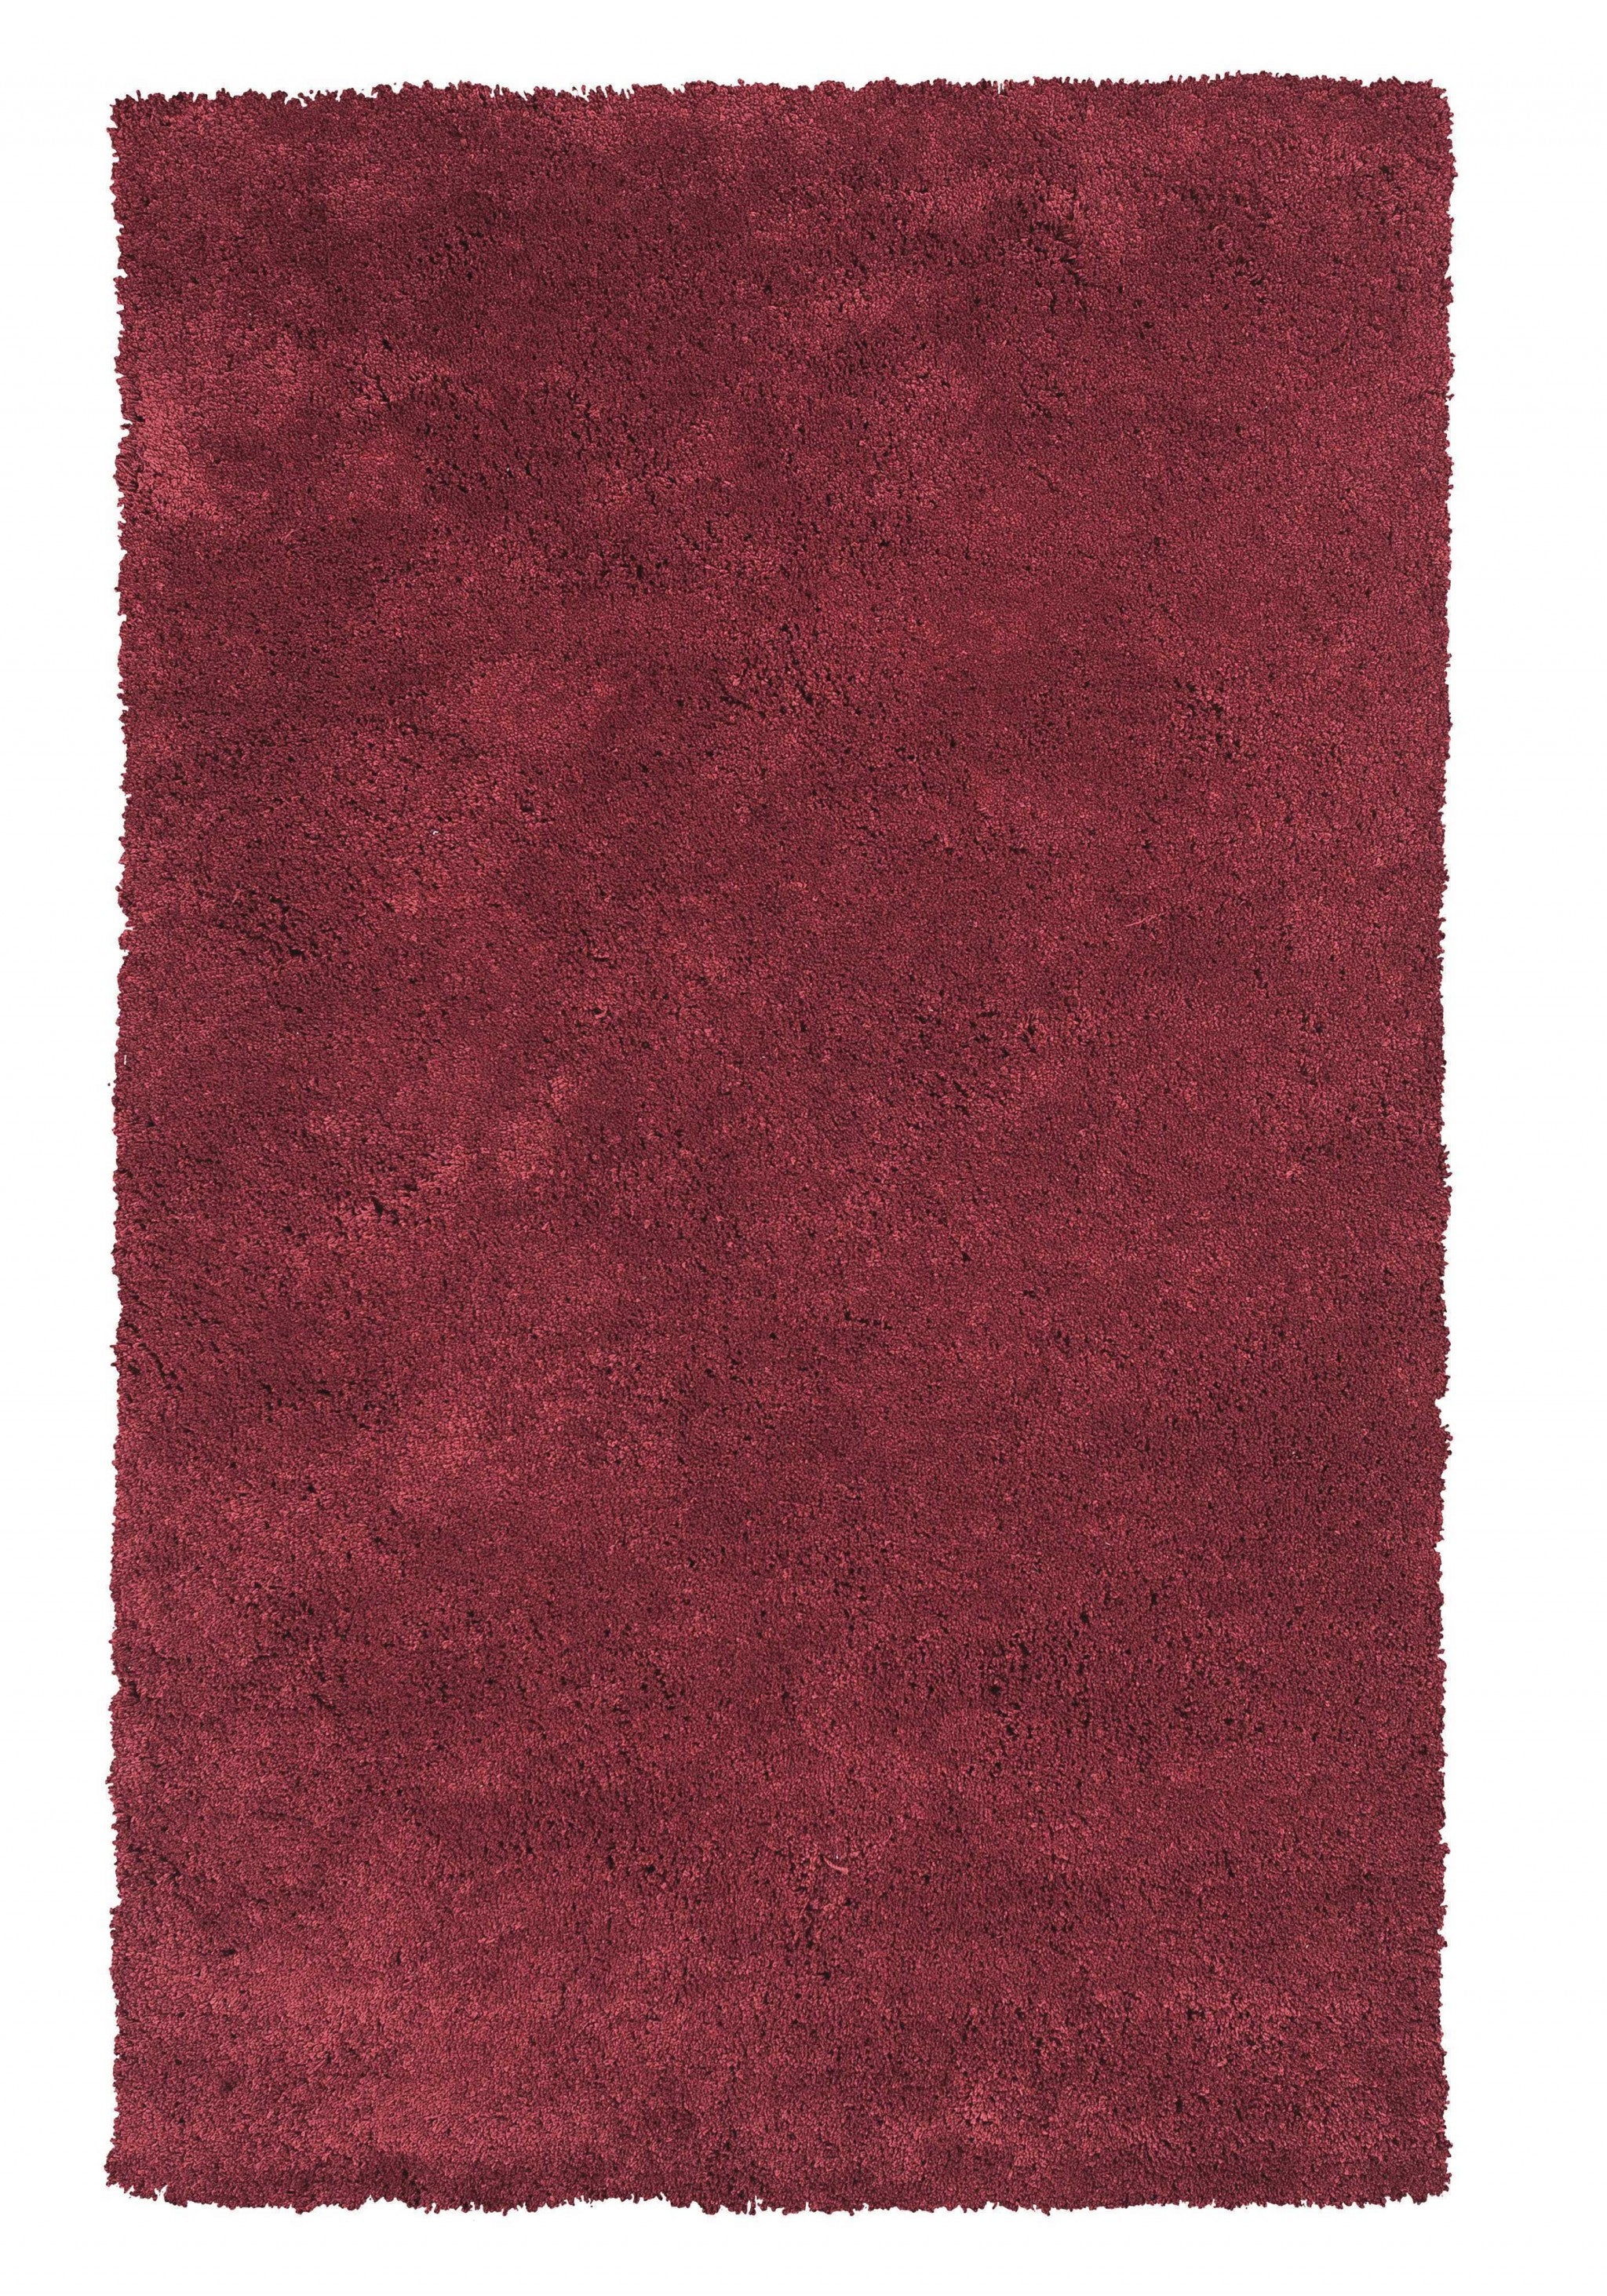 8' x 11'  Solid  Red Shag Area Rug Default Title